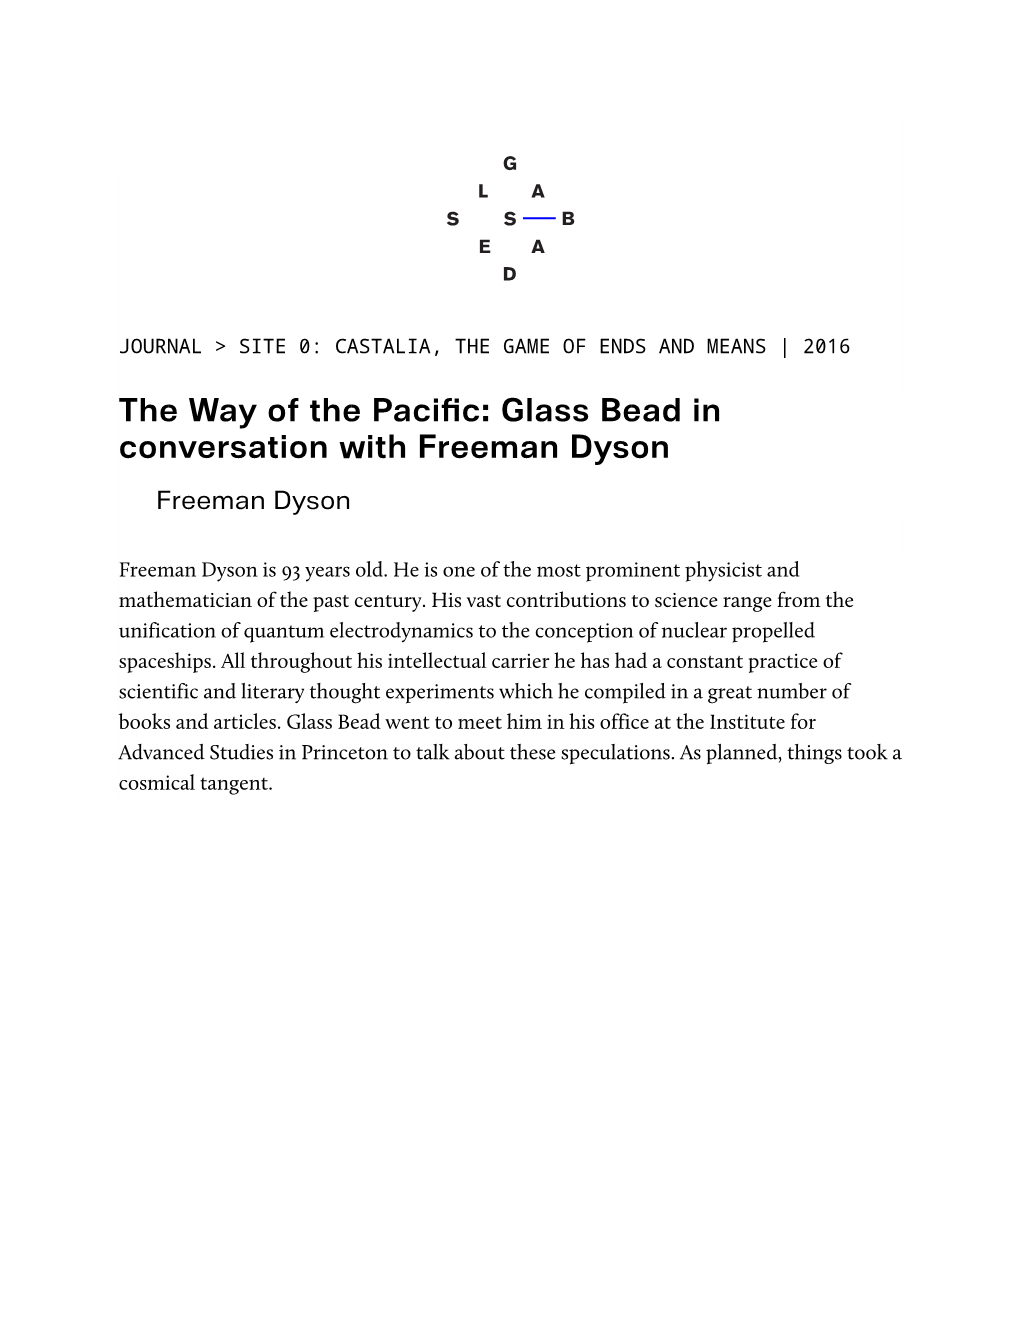 The Way of the Pacific: Glass Bead in Conversation with Freeman Dyson Freeman Dyson